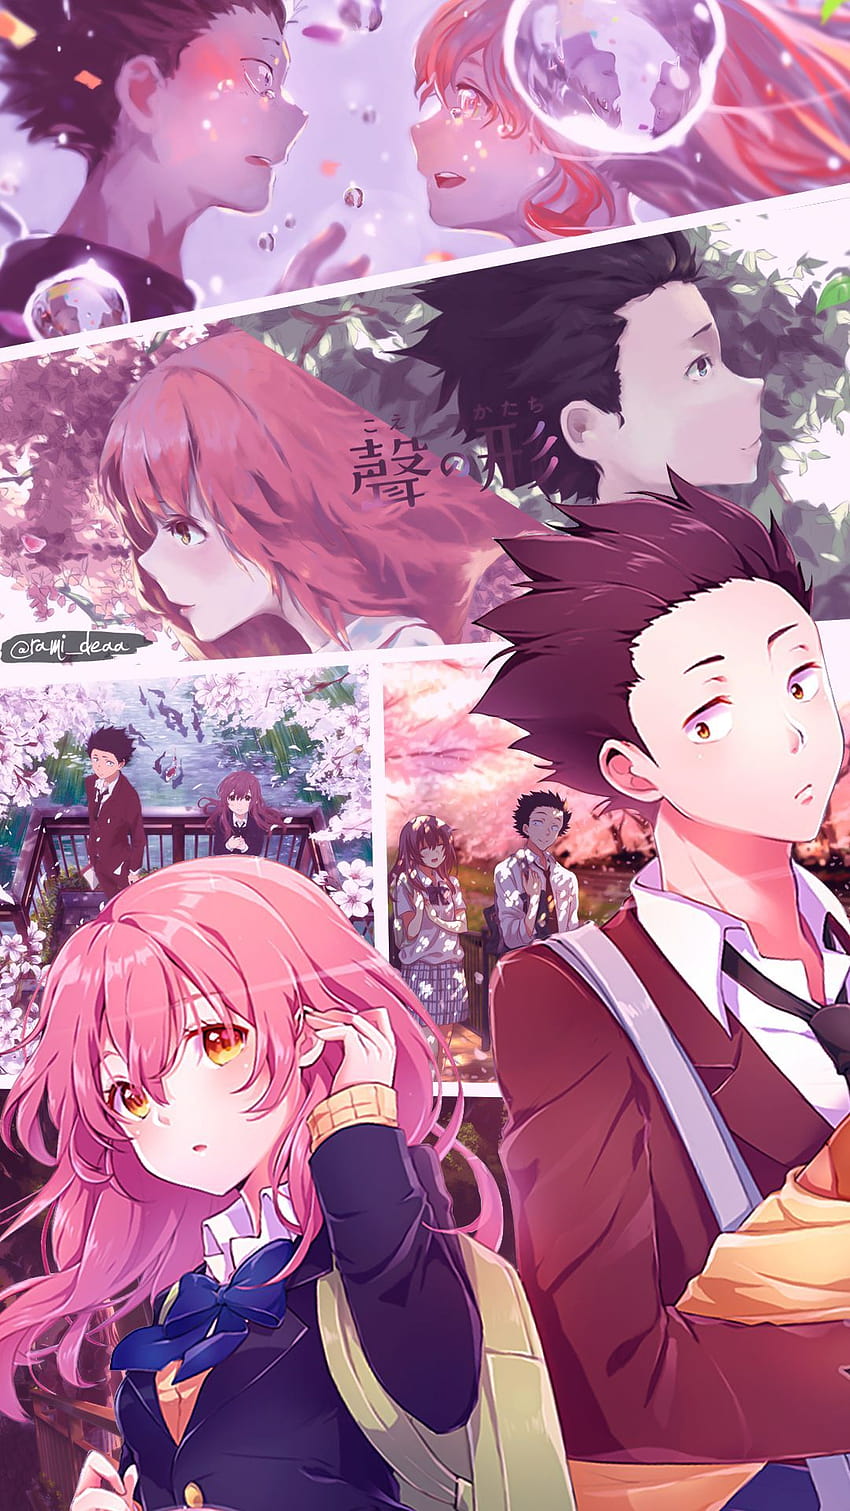 5 Reasons Why A Silent Voice Koe No Katachi is Underappreciated 